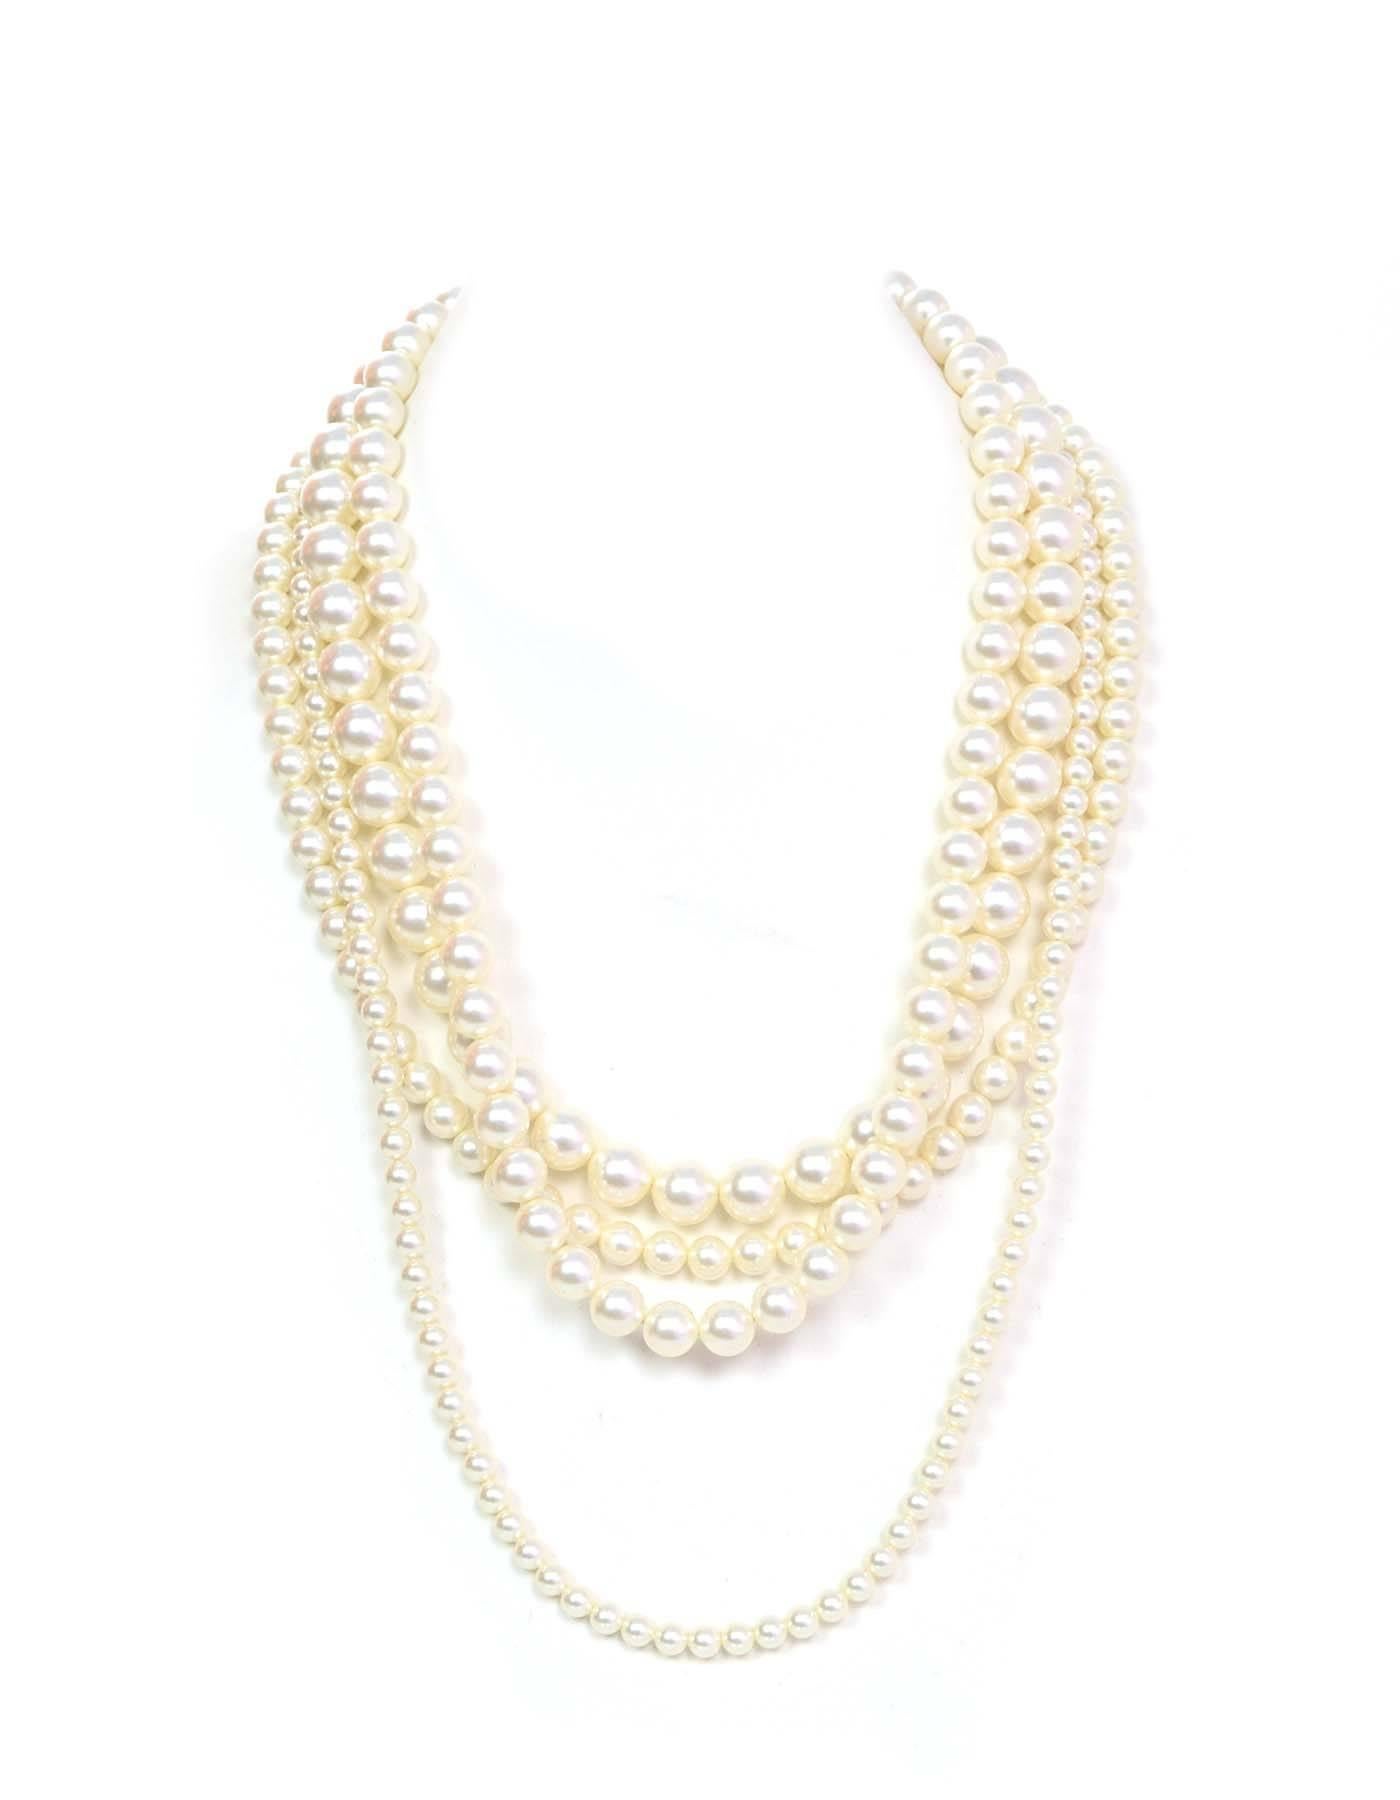 Lanvin 4 Strand Faux Pearl Necklace with dark grey crystal and faux pearl clasp

Made In: France
Color: Ivory, grey
Materials: Faux pearl, metal, crystal
Closure: Spring ring closure
Stamp: Lanvin Paris Made in France
Retail Price: $1,000 +